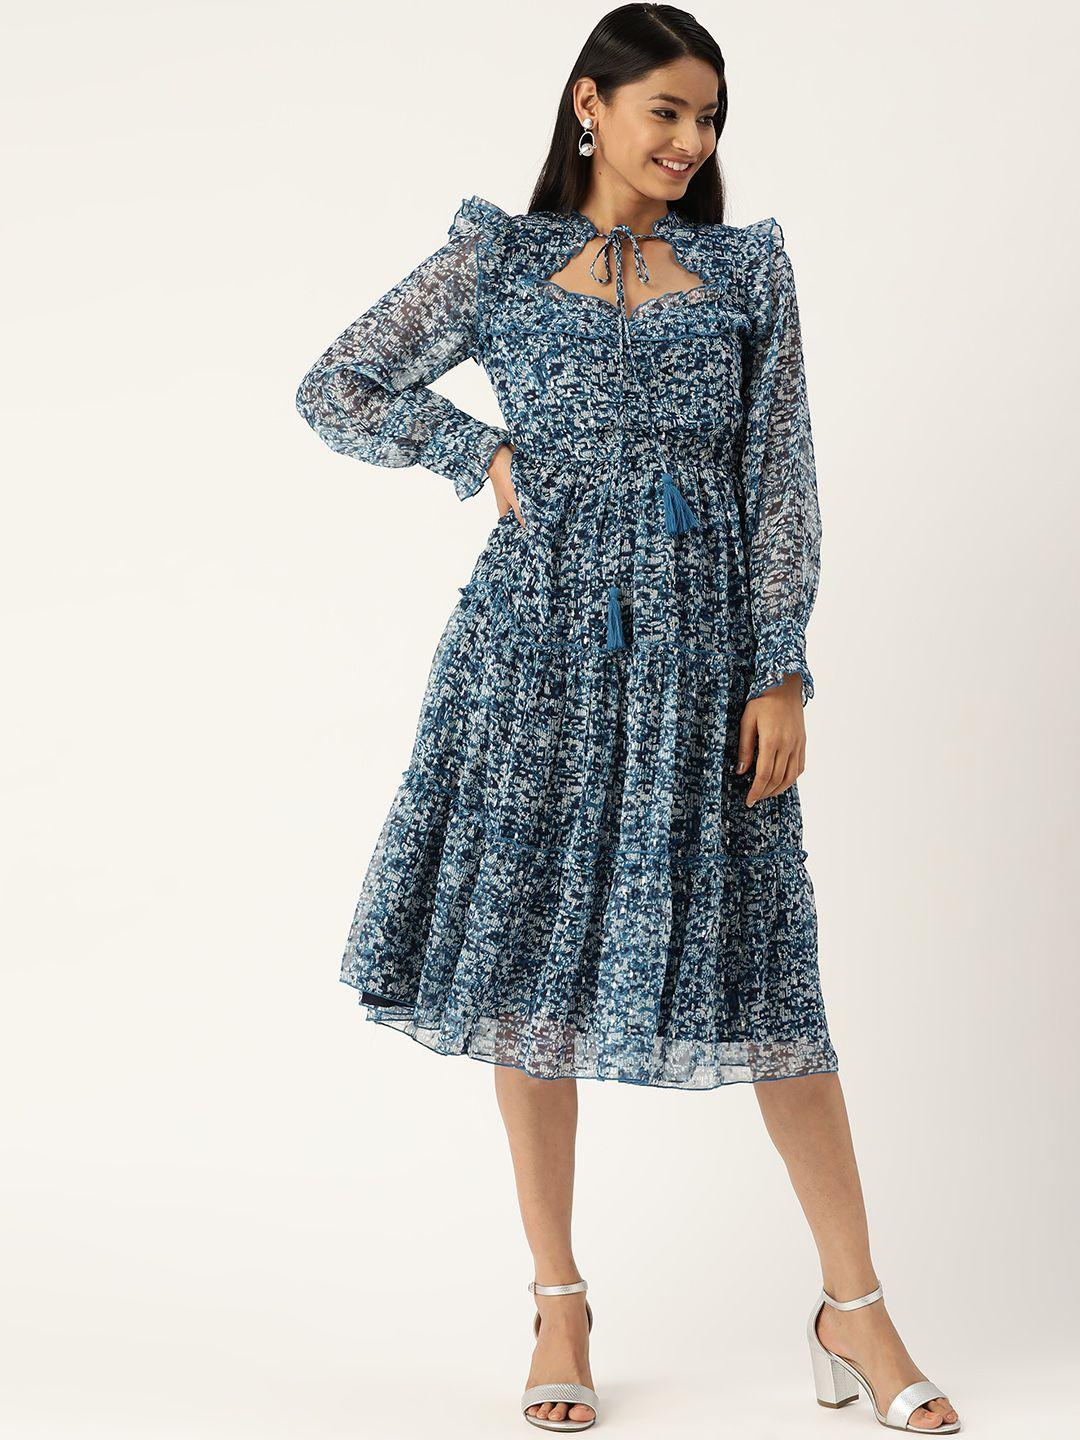 antheaa-women-blue-&-white-printed-a-line-tiered-dress-with-tie-up-neck